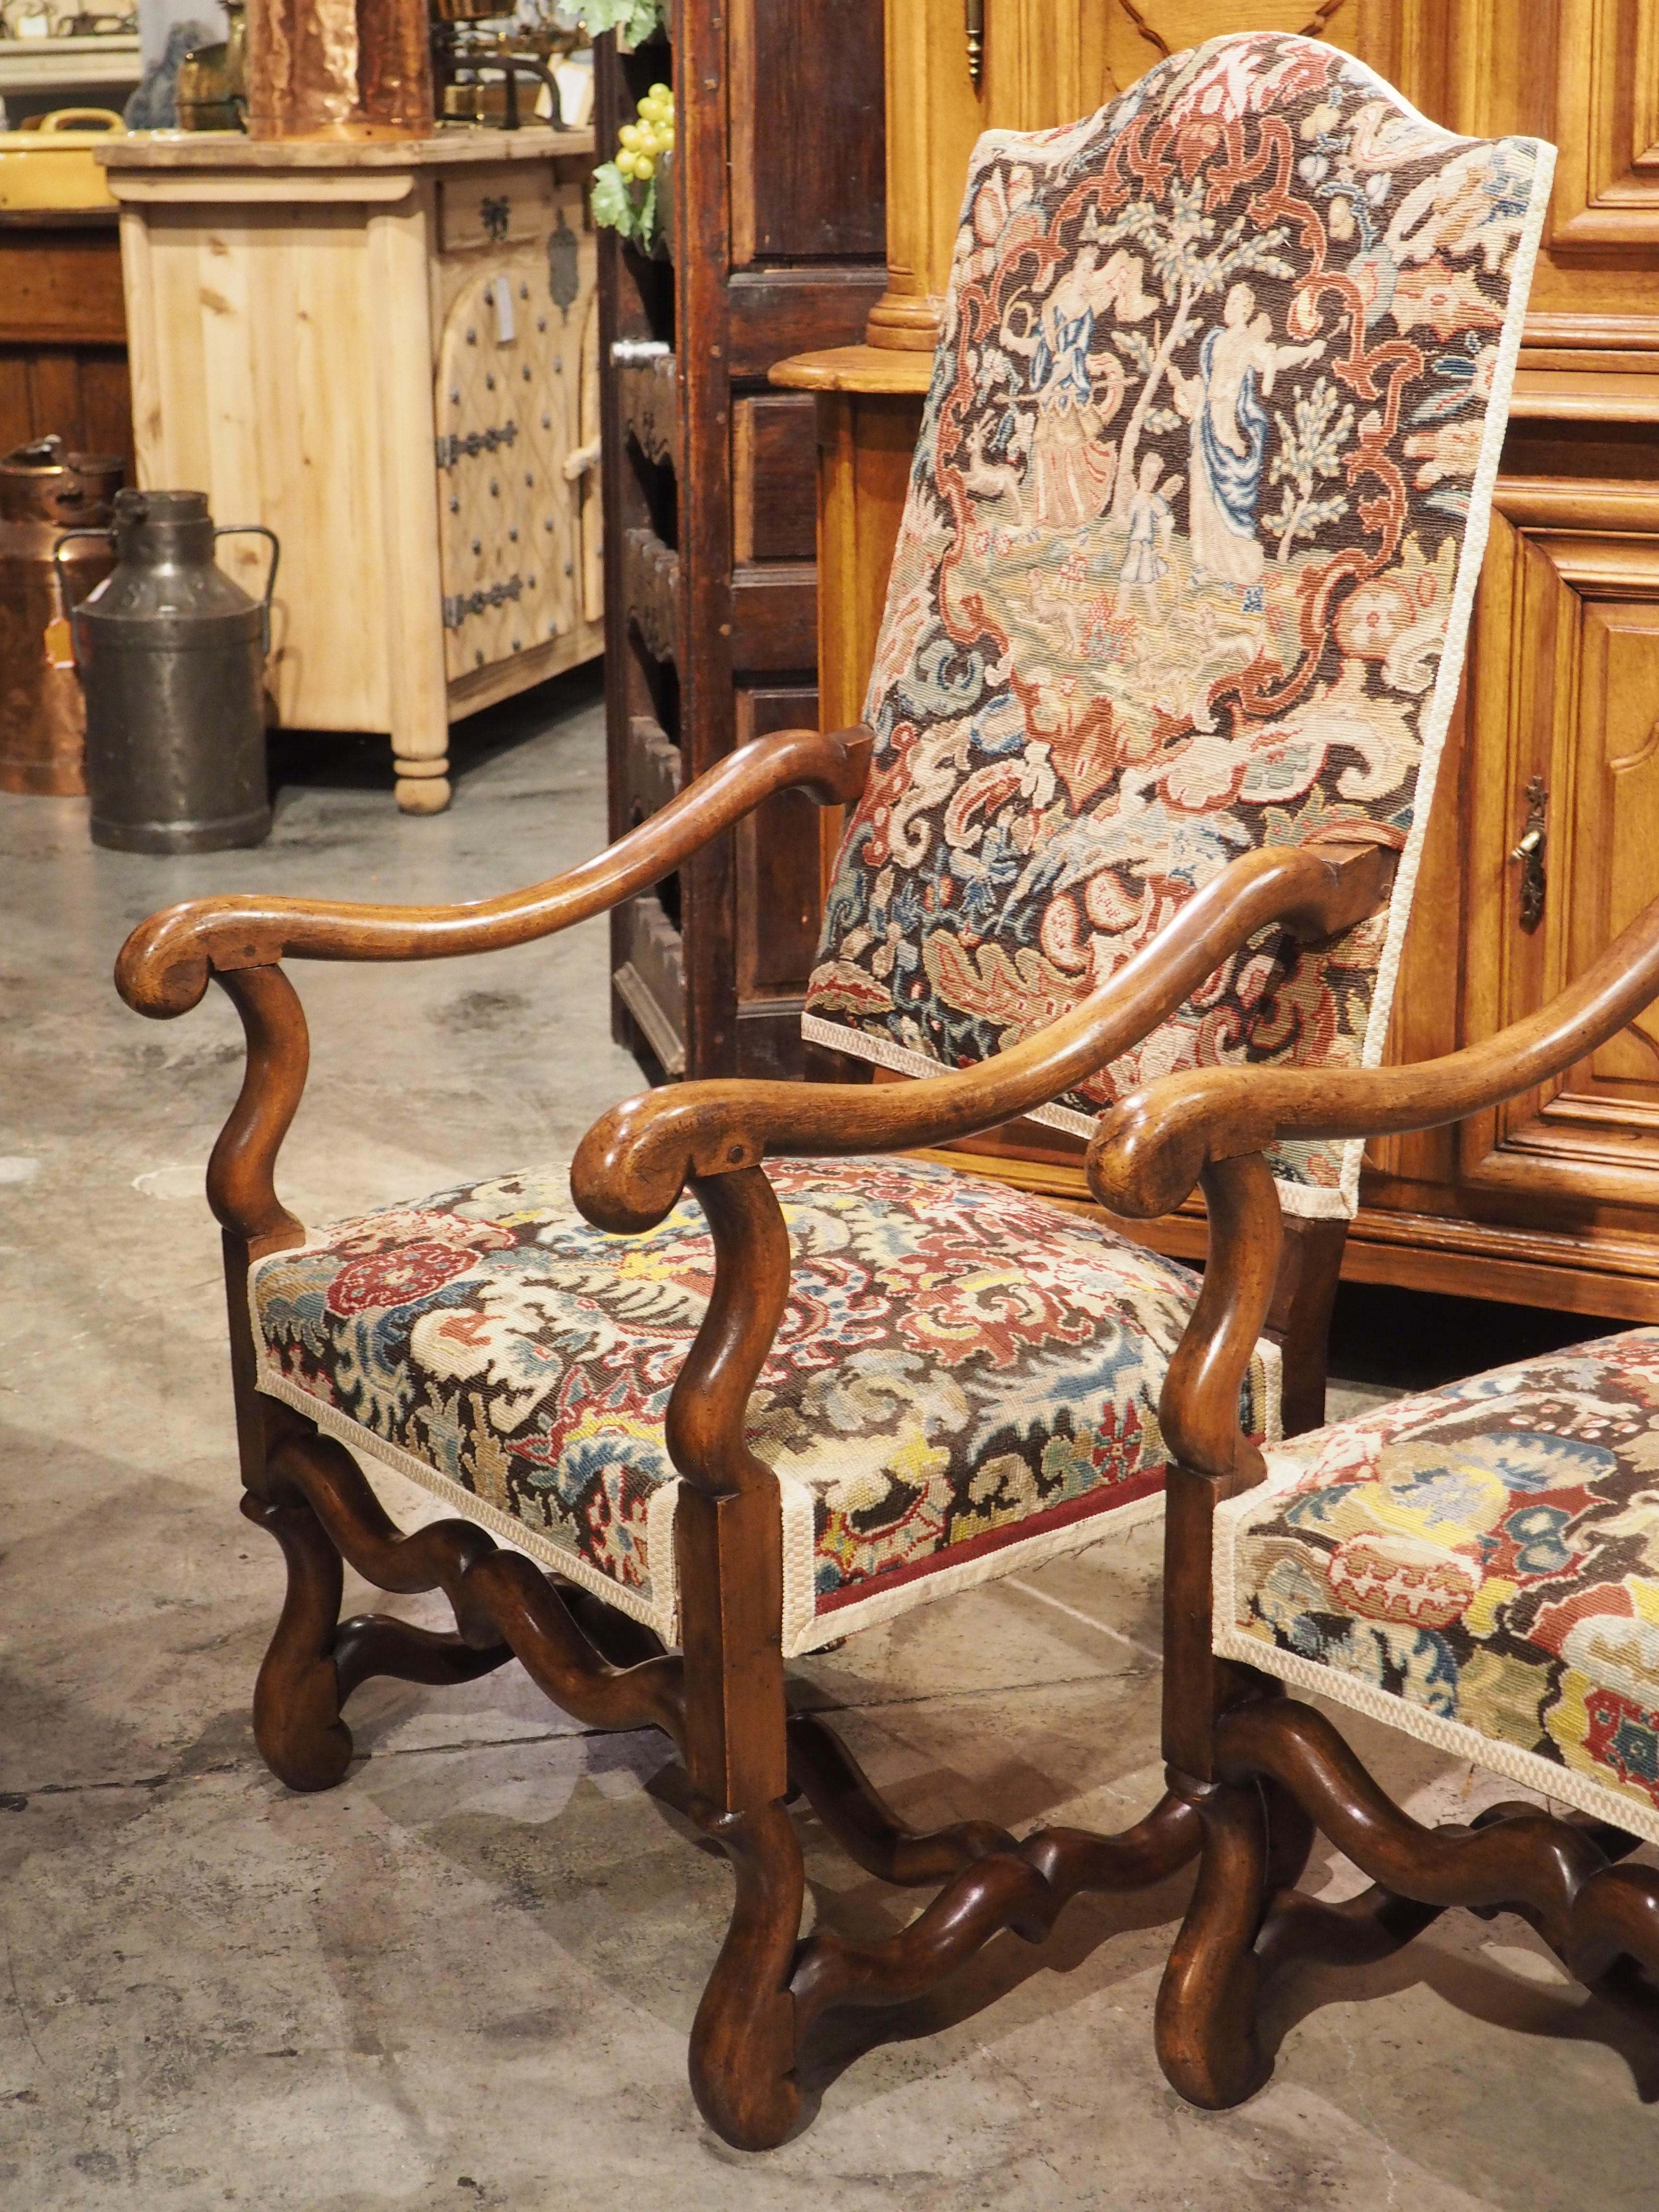 Known as os de mouton (“sheep bone”), this pair of walnut armchairs were hand-carved in France, circa 1880. An H-shaped stretcher is typical of a late Louis XIII/early Louis XIV armchair and the shapely connectors flow seamlessly into the rounded